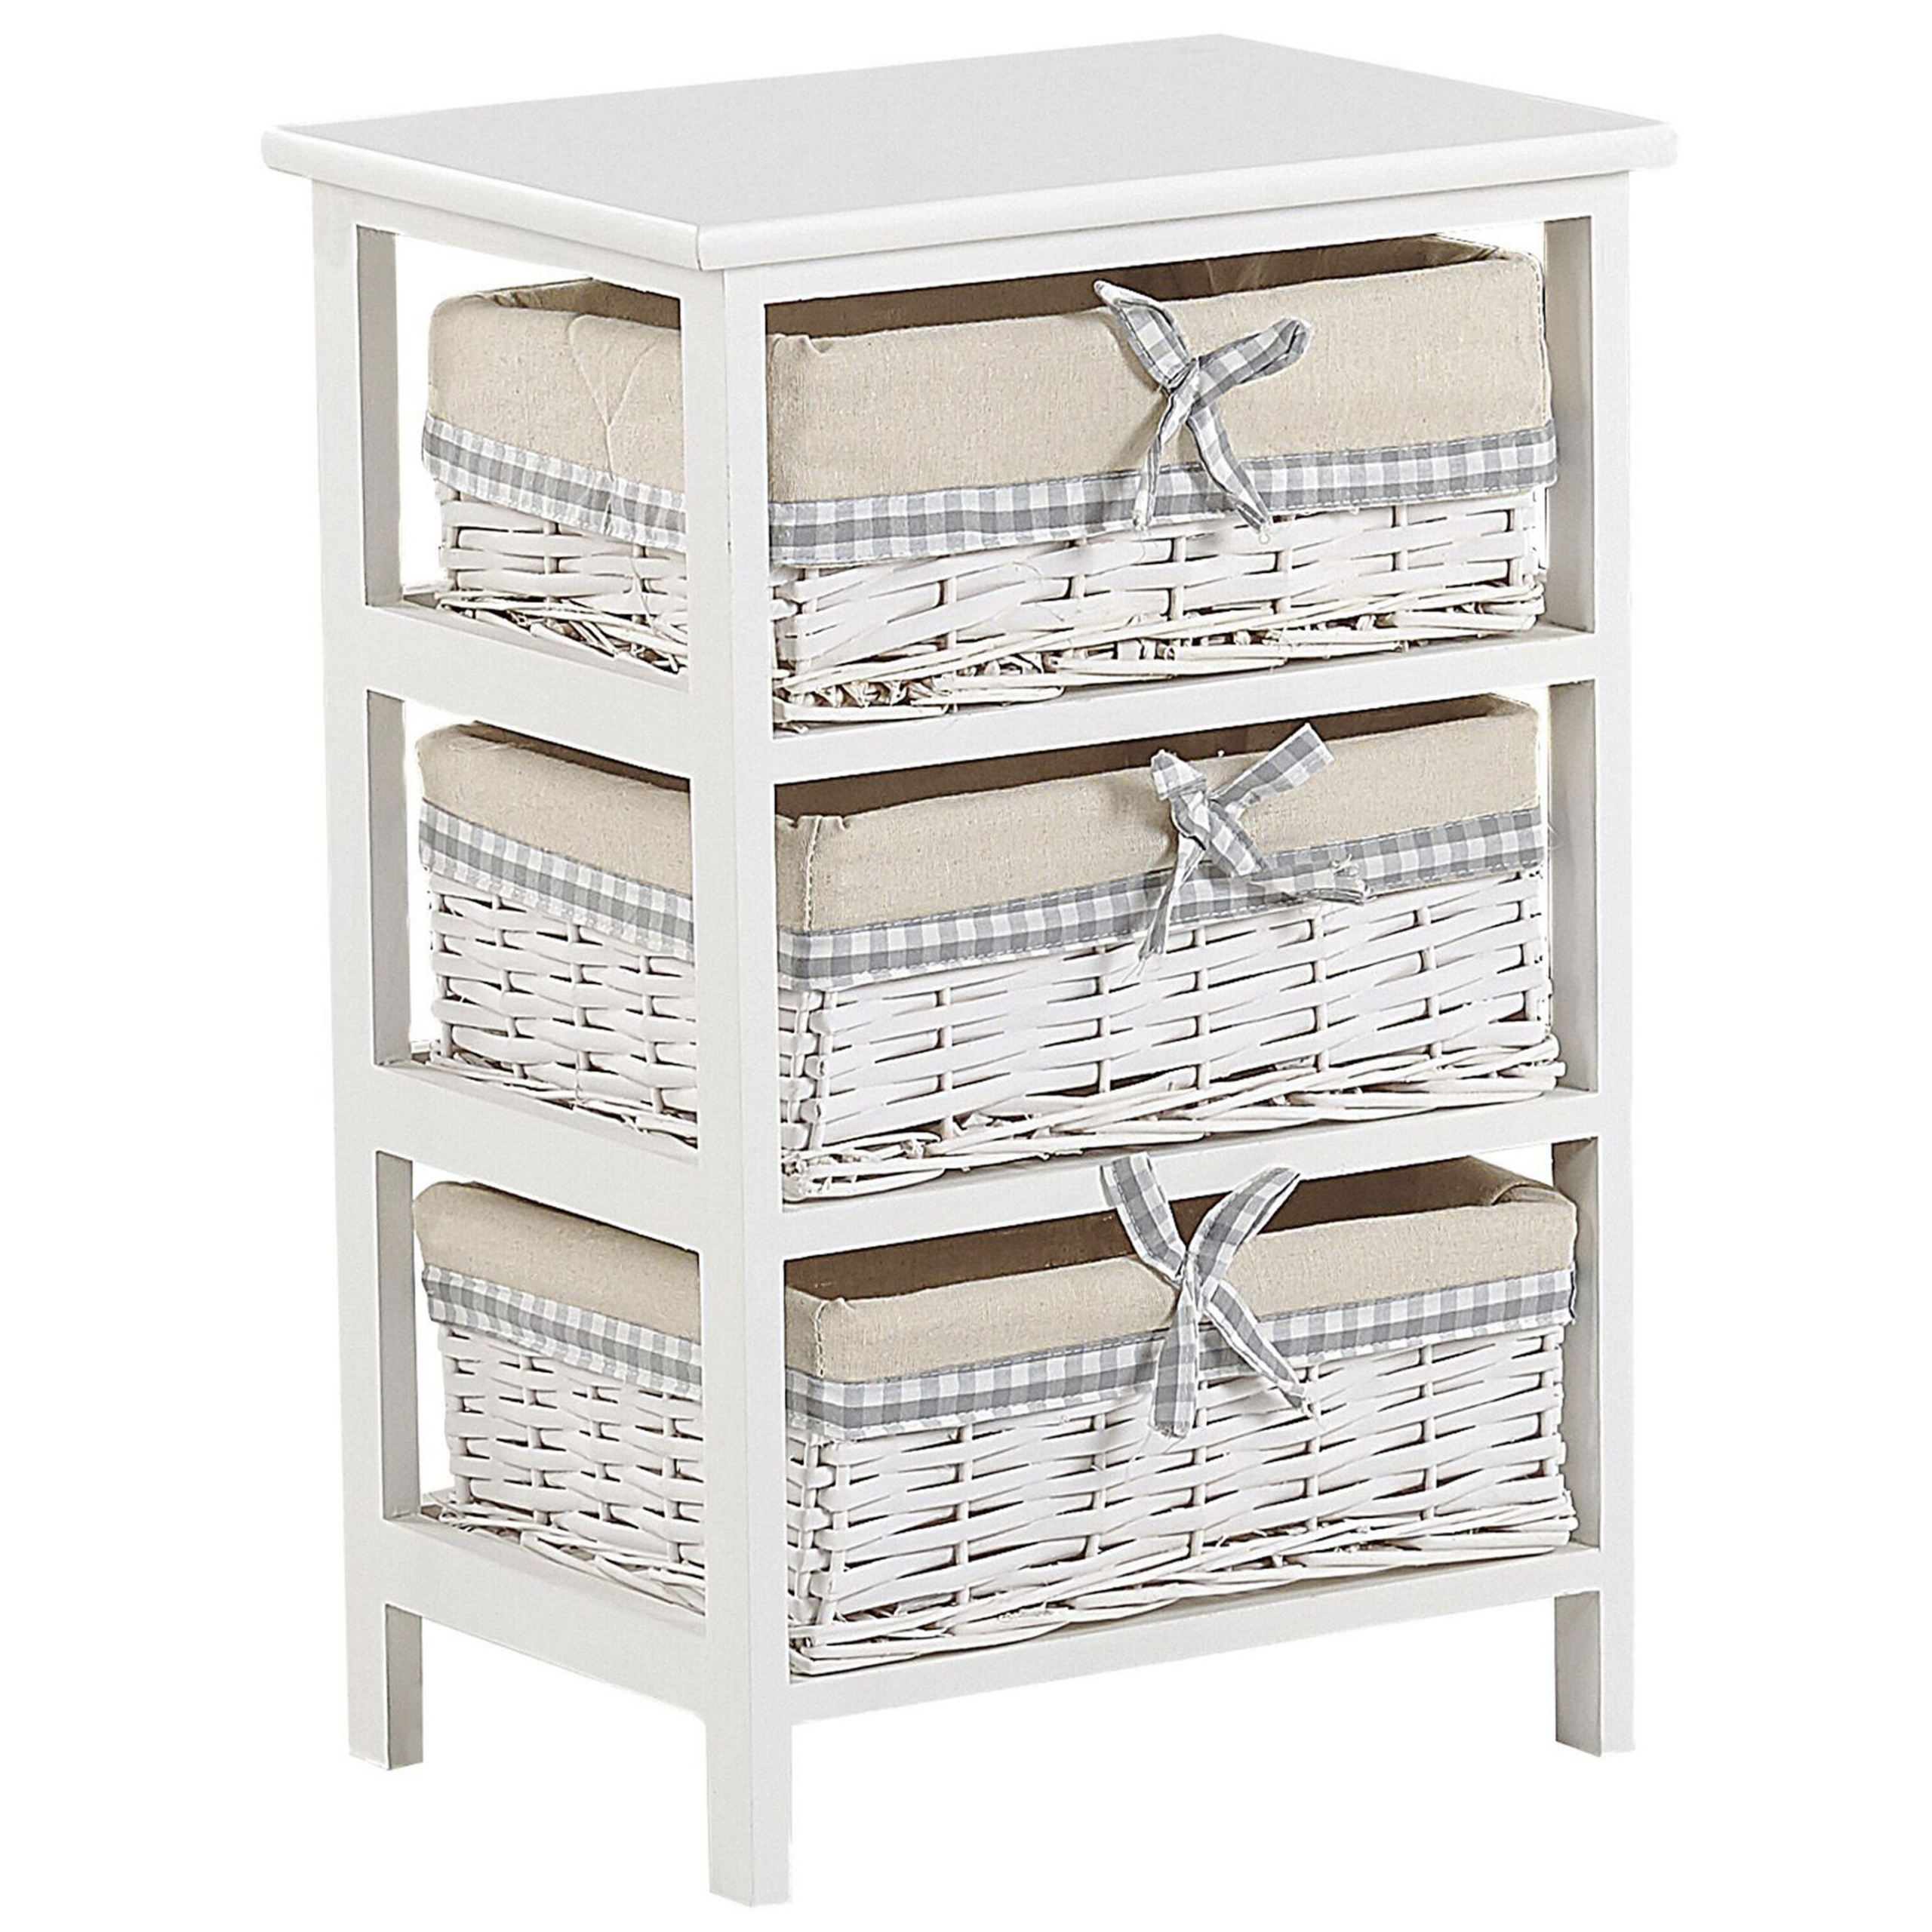 Beliani Storage Unit White Wood MDF 58 x 40 cm 3 Wicker Baskets with Beige Fabric Lining Bedside Table Children's Room Furniture